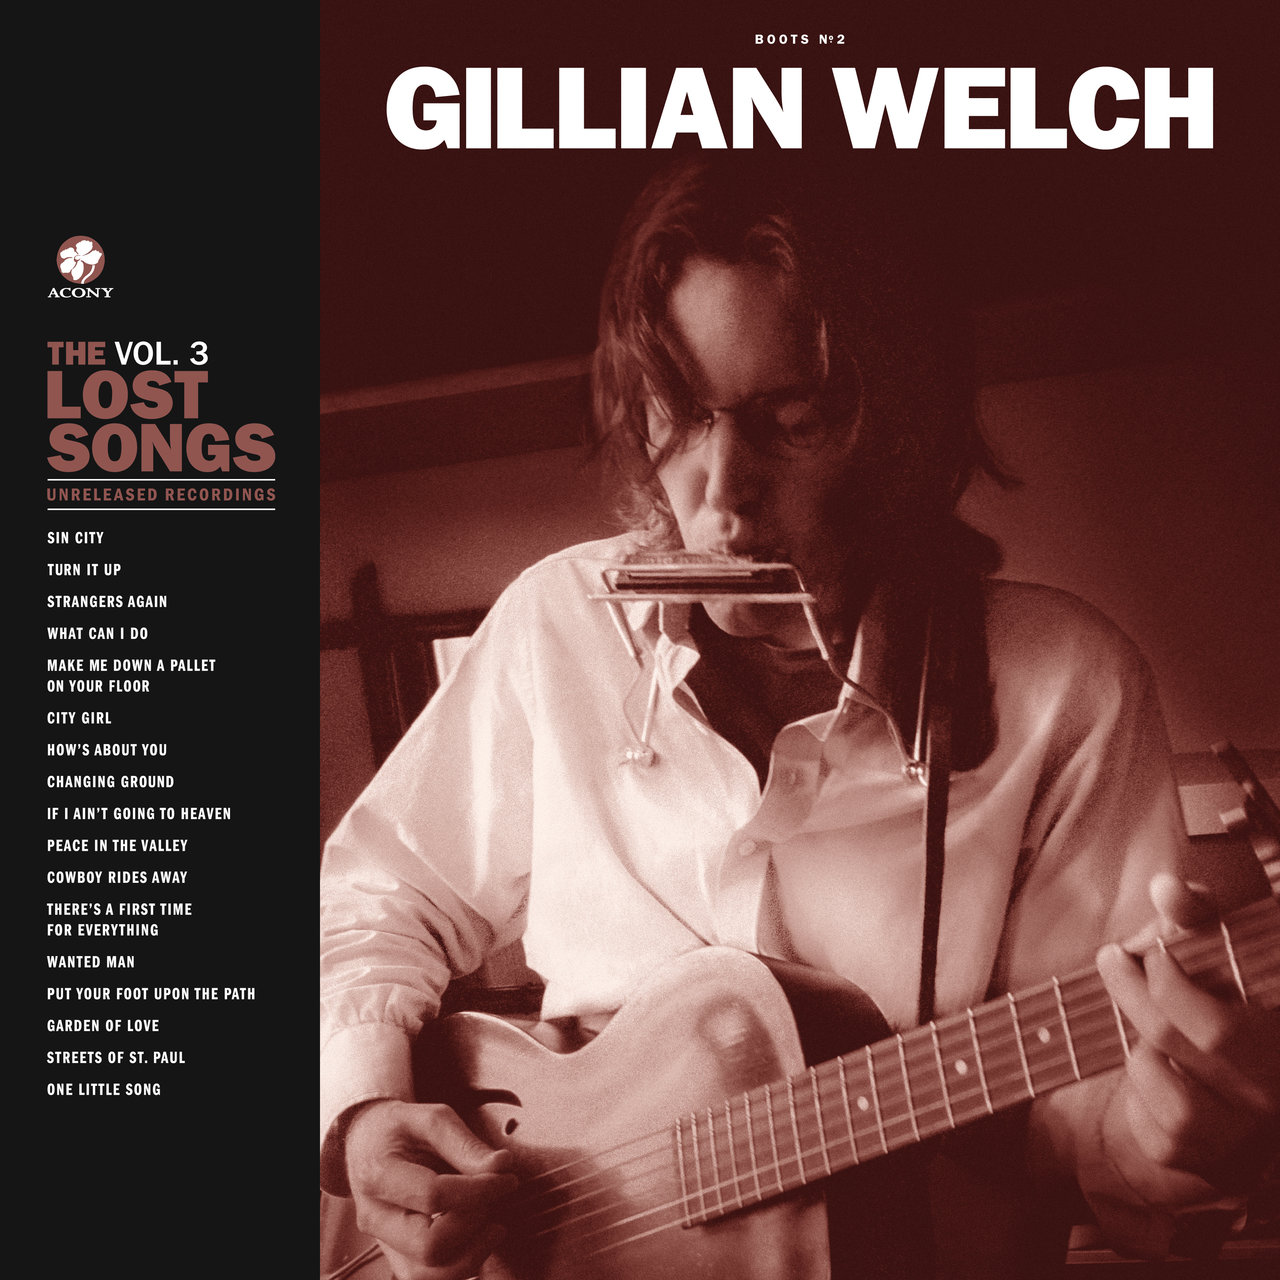 Gillian Welch - Boots No. 2 - The Lost Songs, Vol. 3 (2020) [FLAC 24bit/44,1kHz]